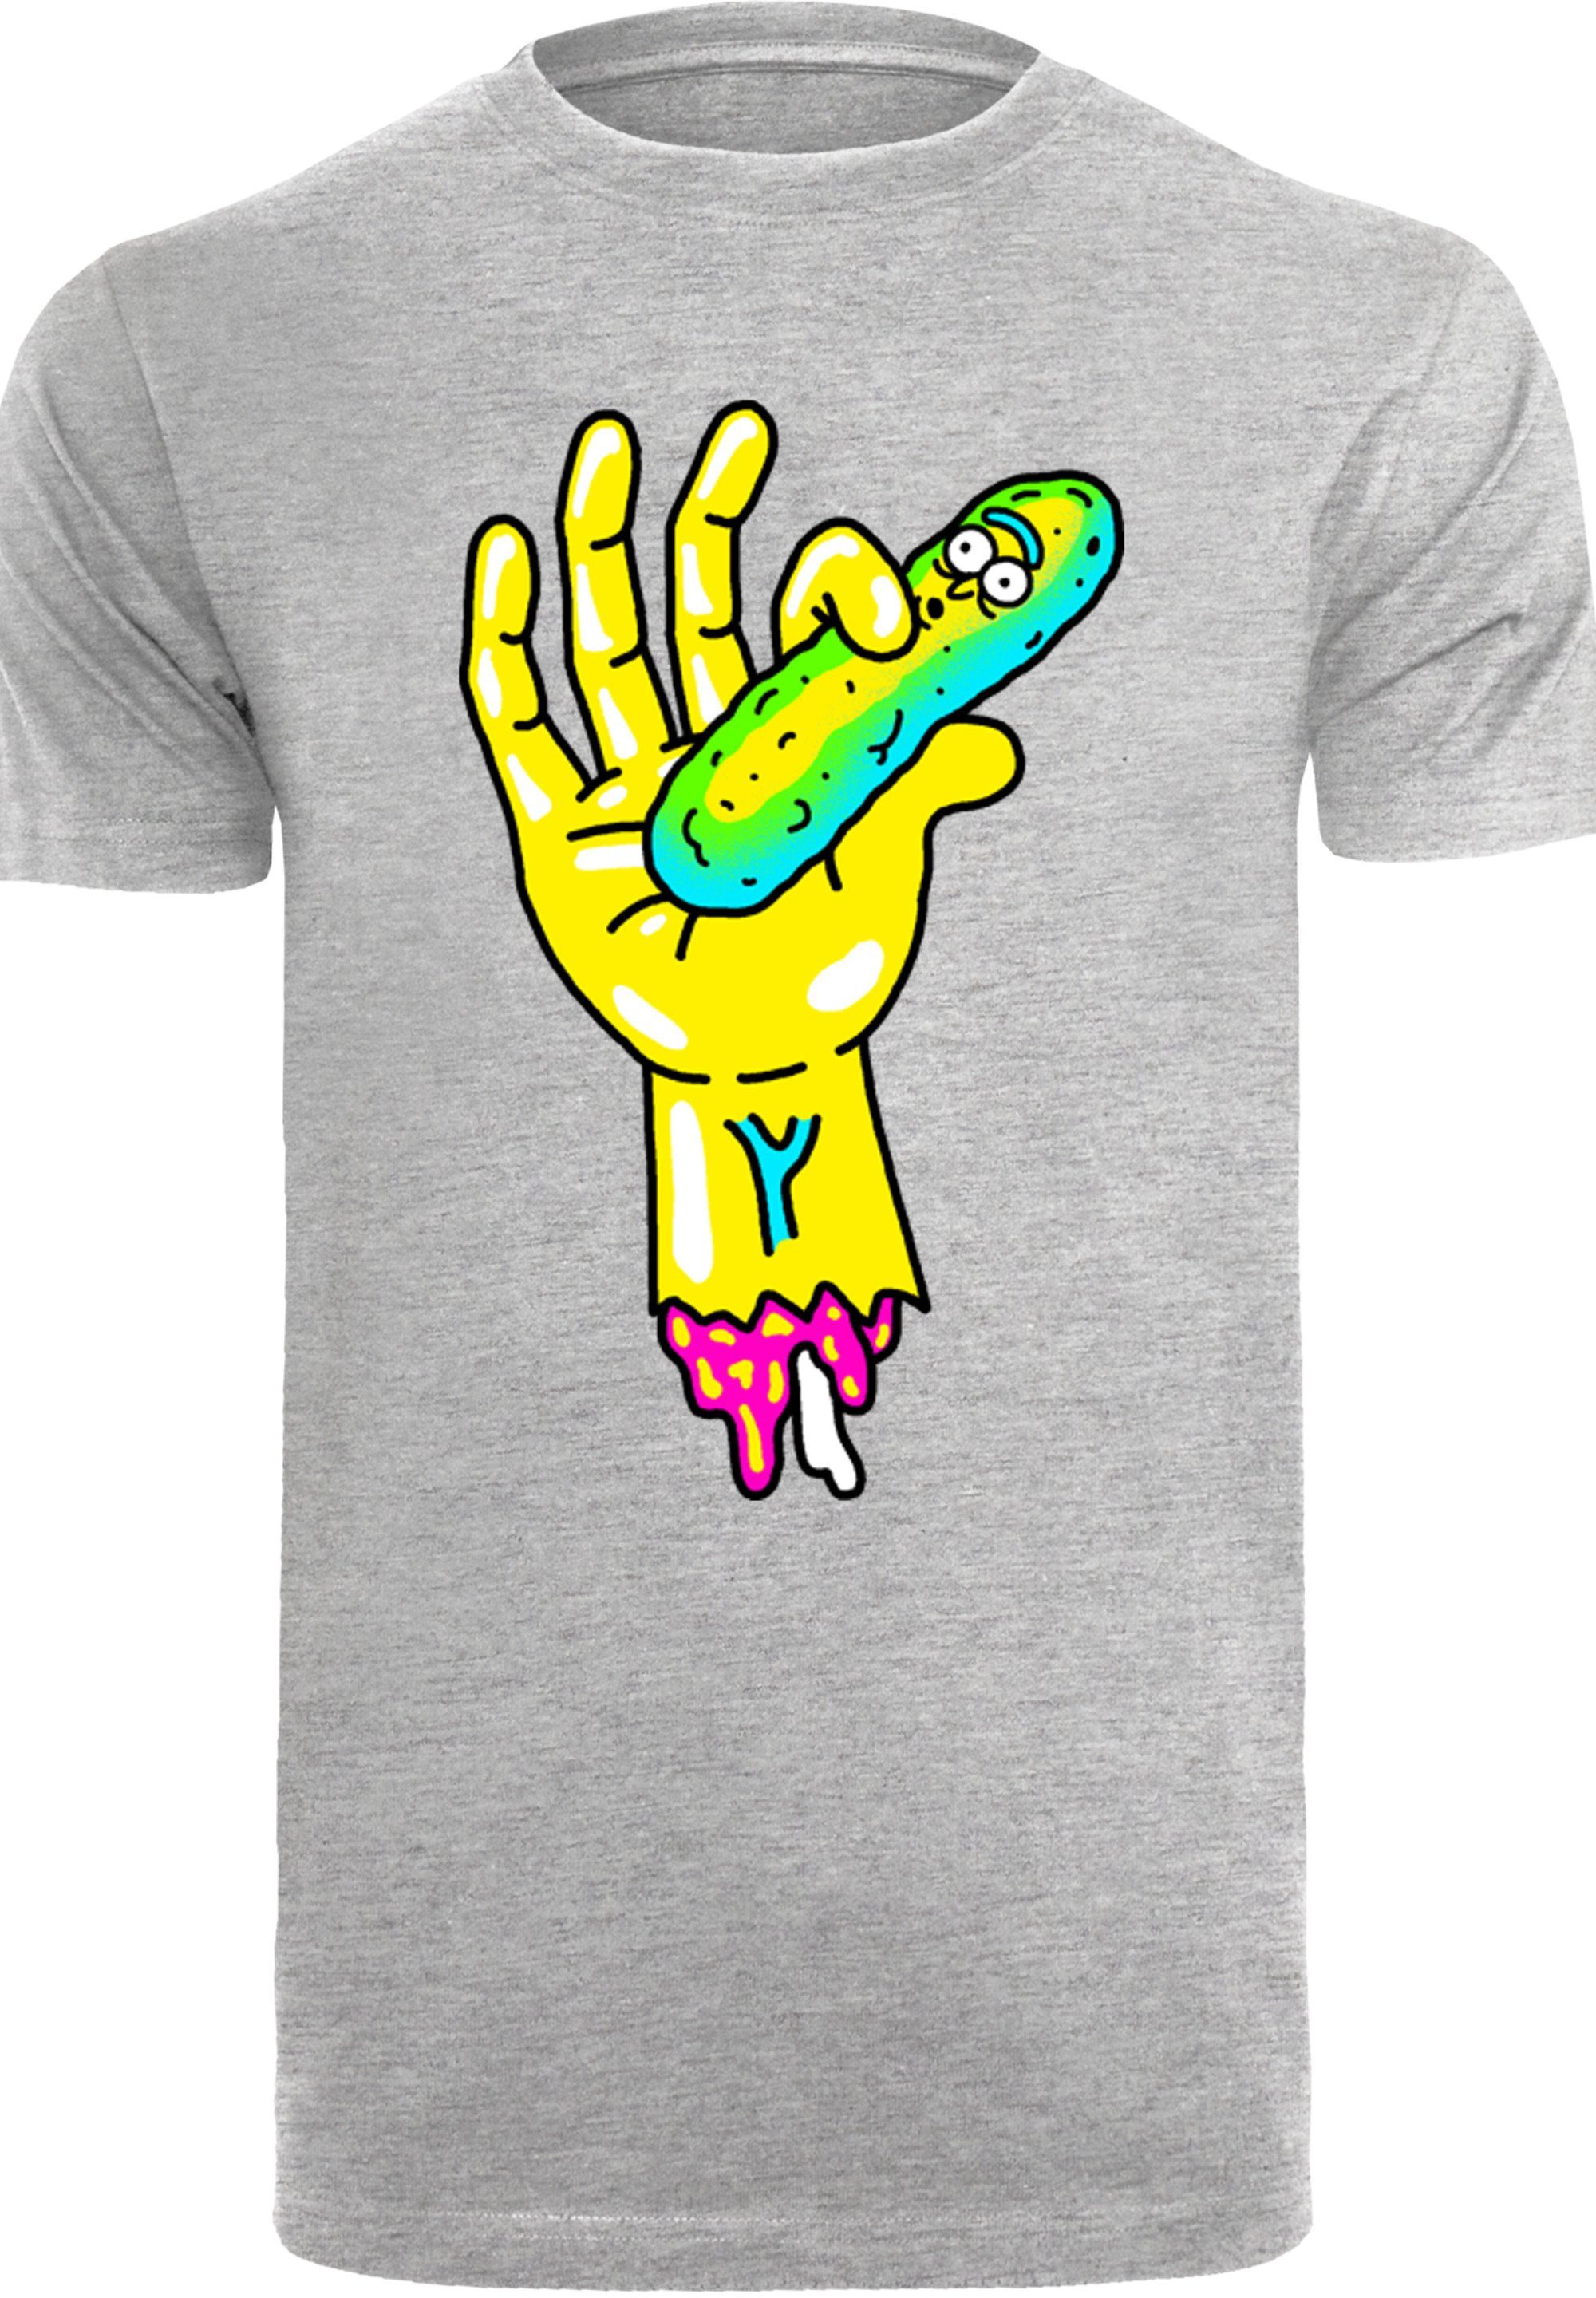 F4NT4STIC T-Shirt Rick Morty grey Pickle Hand and heather Print